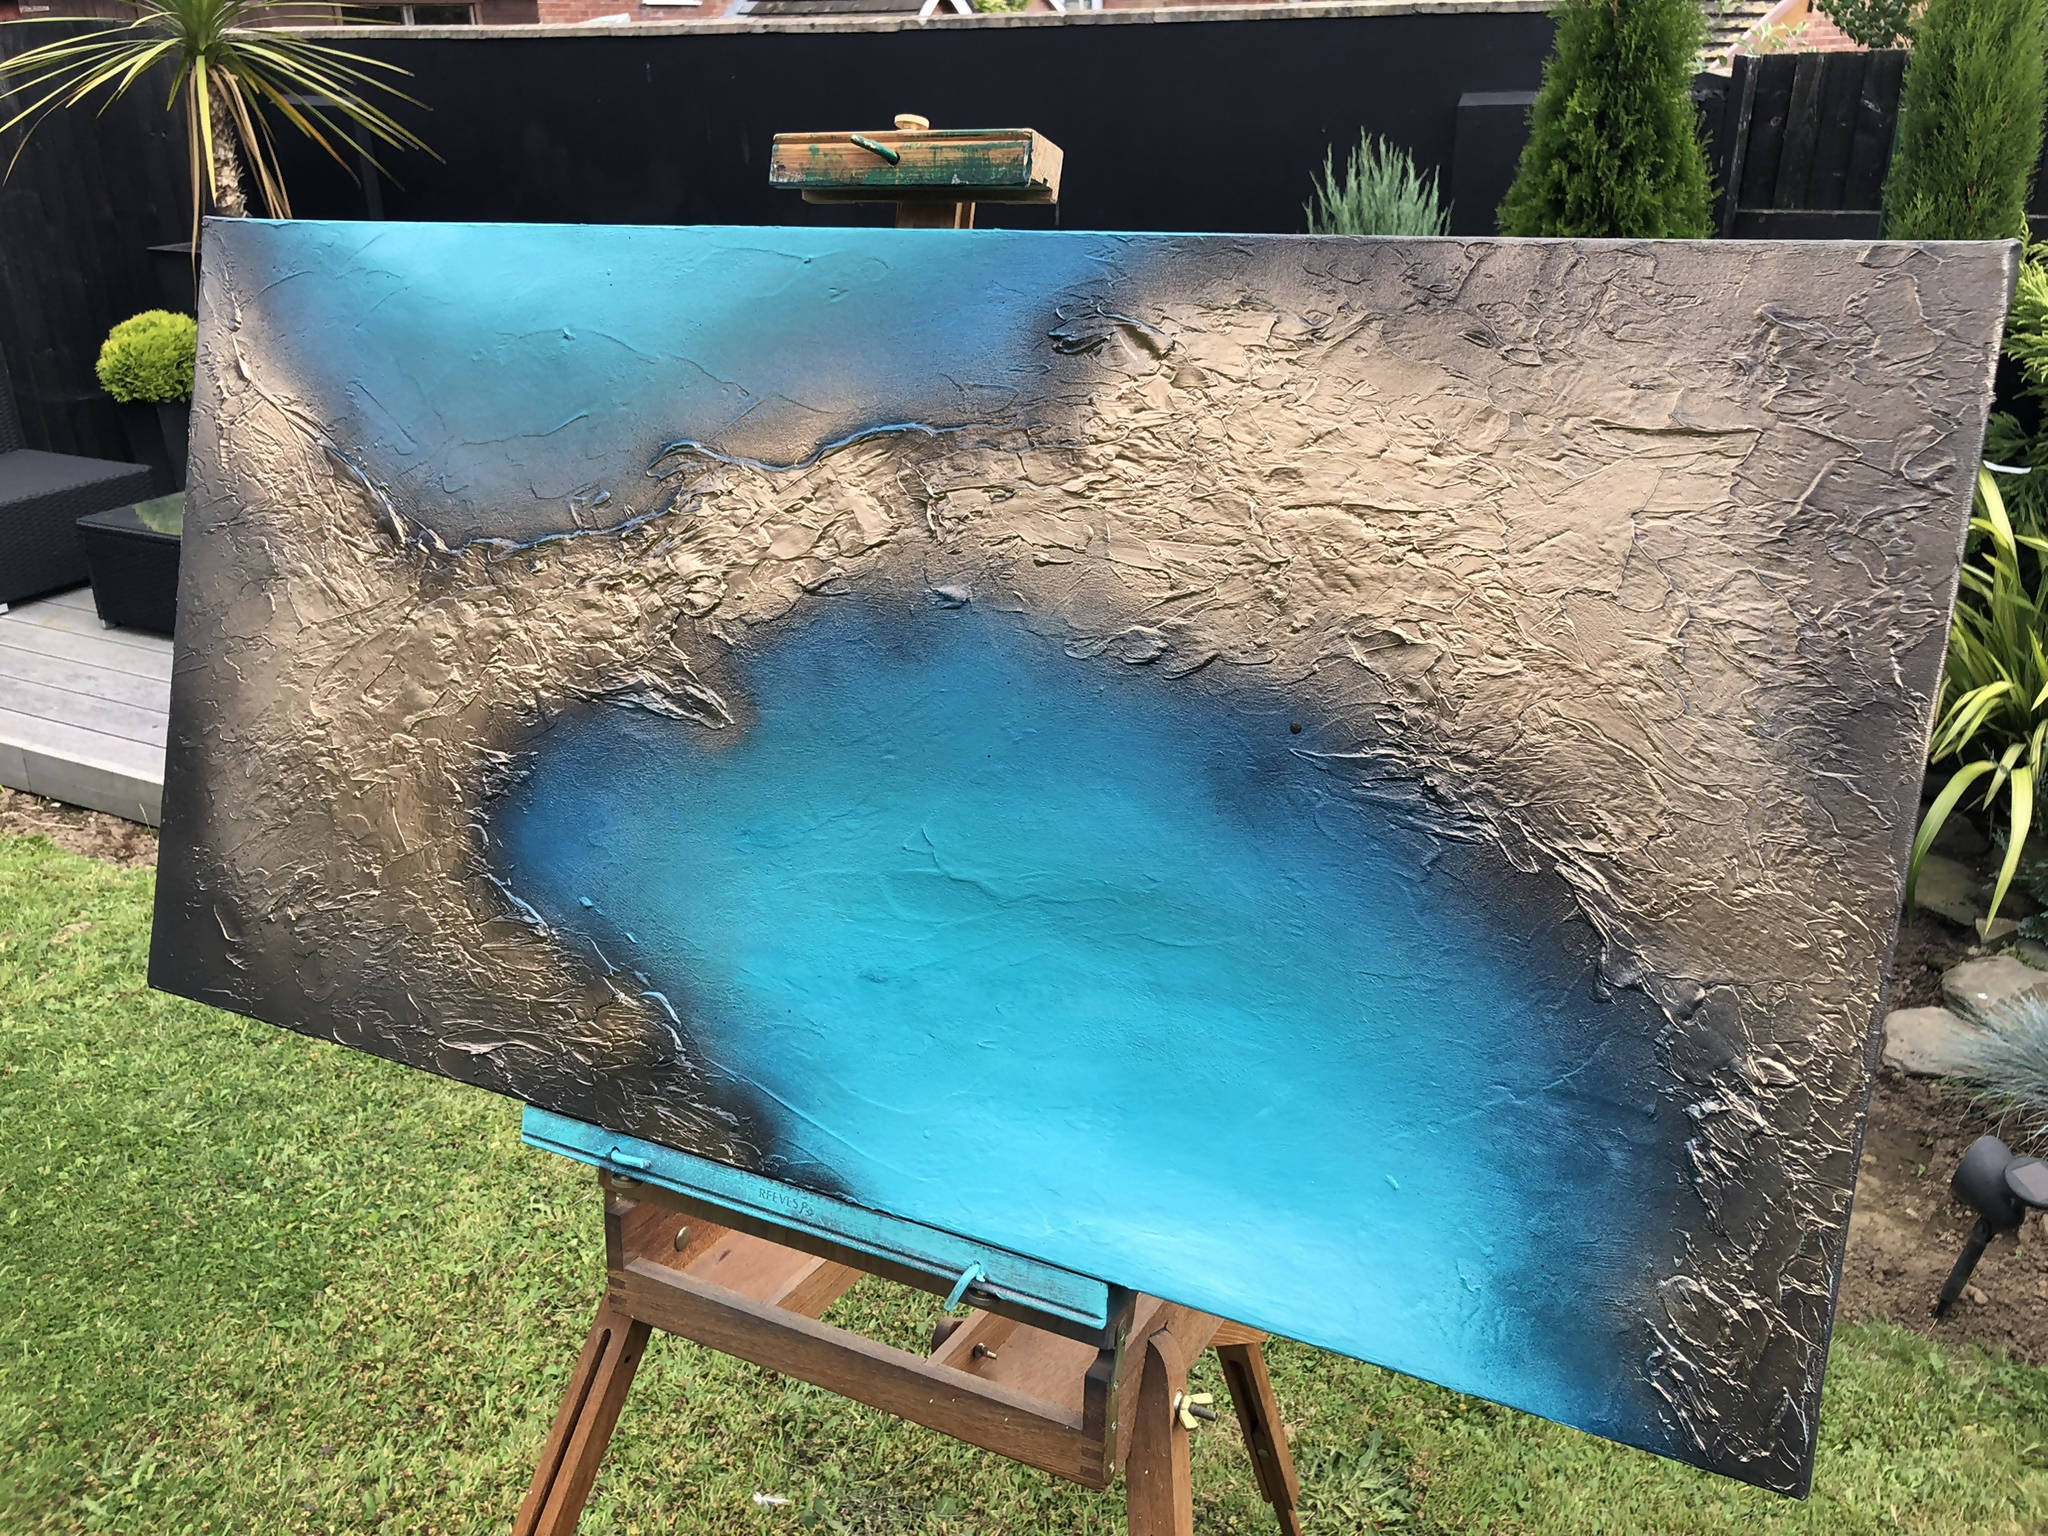 COASTAL BLISS - Striking gold and turquoise mixed media canvas (100x50x4cm)